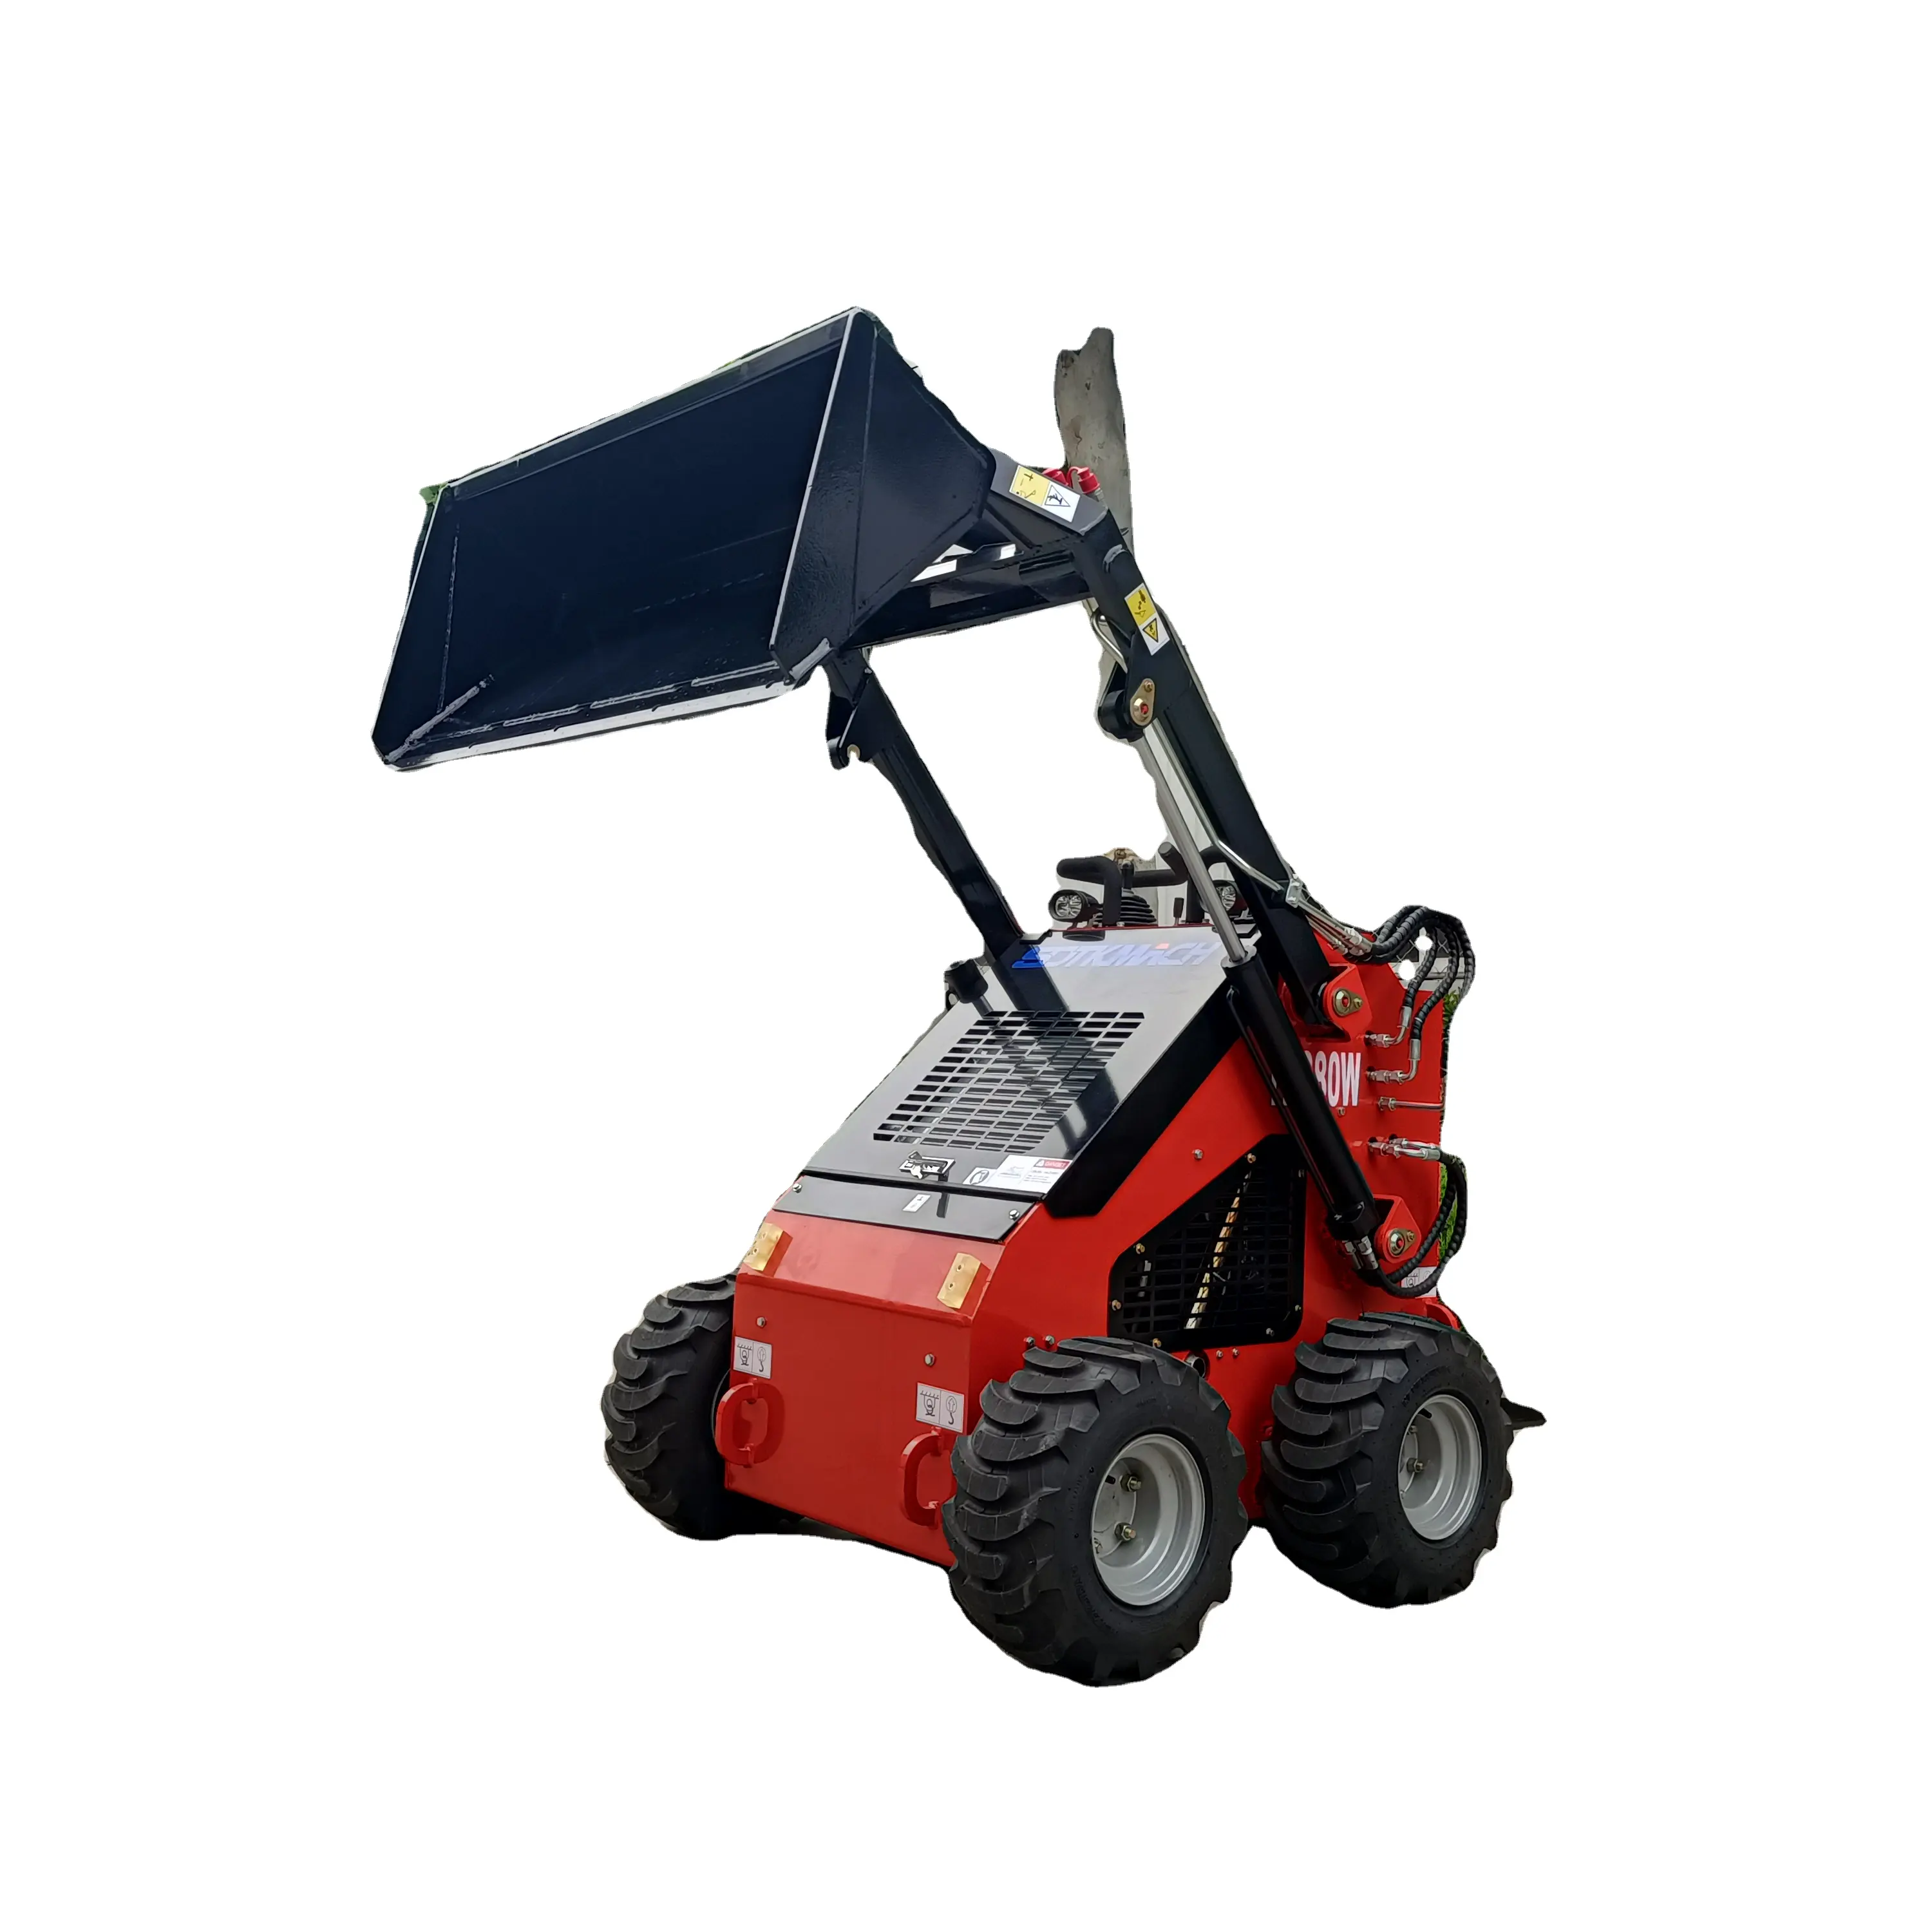 SDTKMACH FREE SHIPPING Hot selling mini skid steer loader and attachments with best price for sale